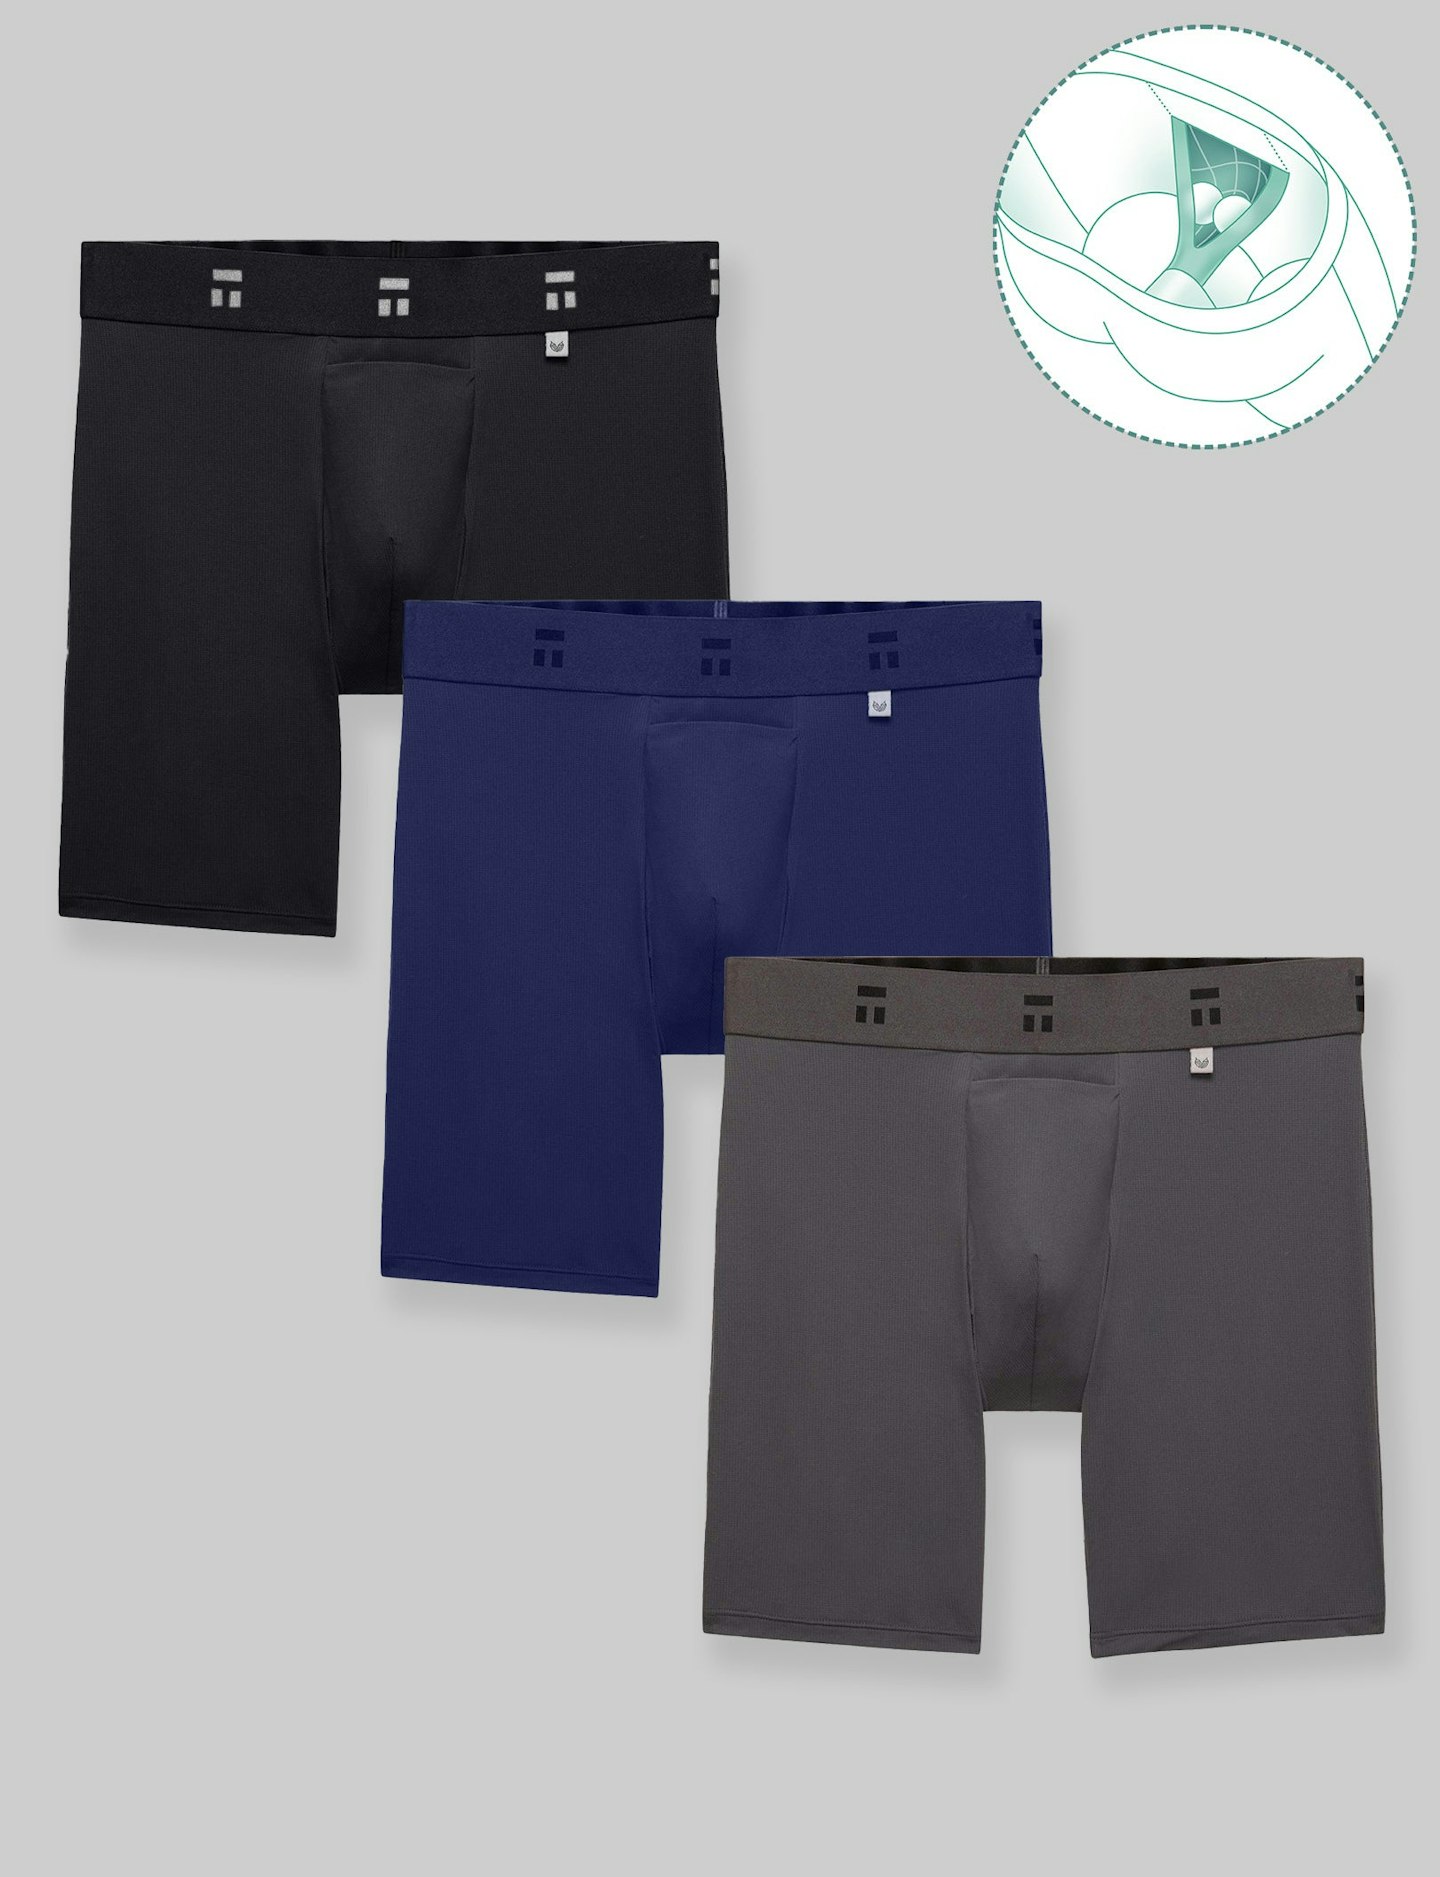 https://tjproduction.imgix.net/files/AirHammockPouchBoxerBrief8__3-Pack_1.jpg?w=1440&fit=crop